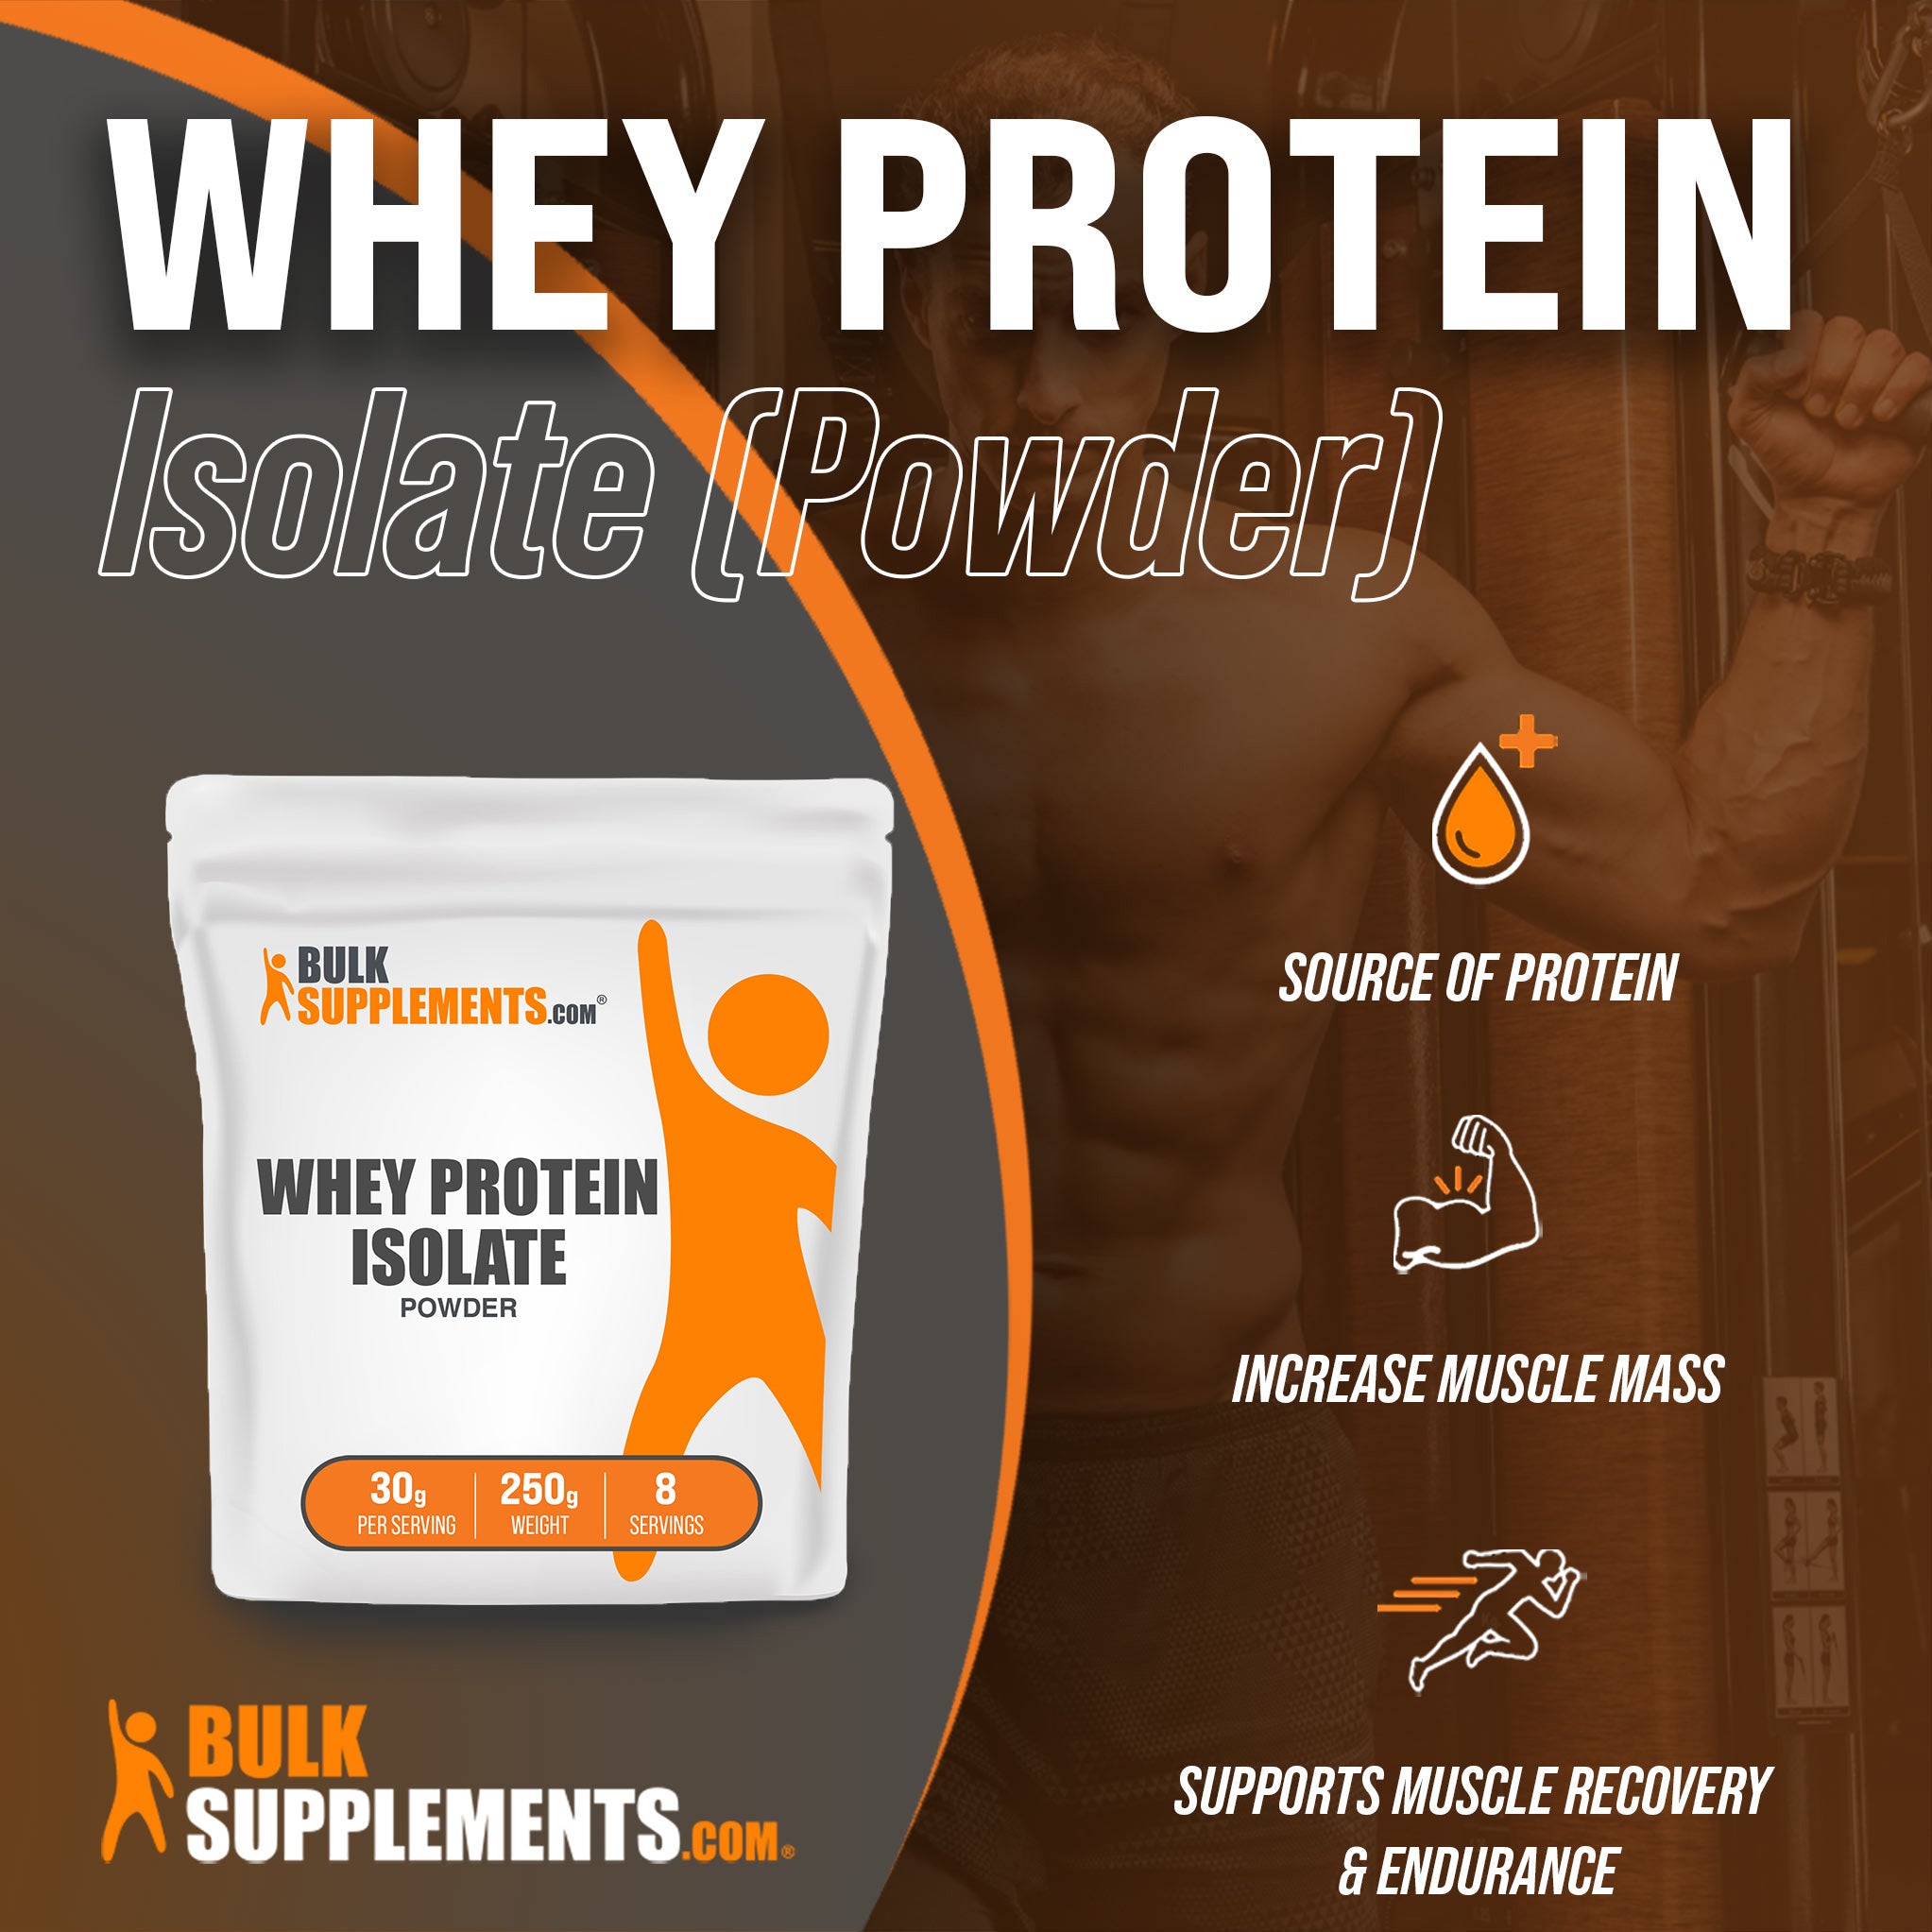 Whey Protein Isolate Powder from Bulk Supplements for muscle mass